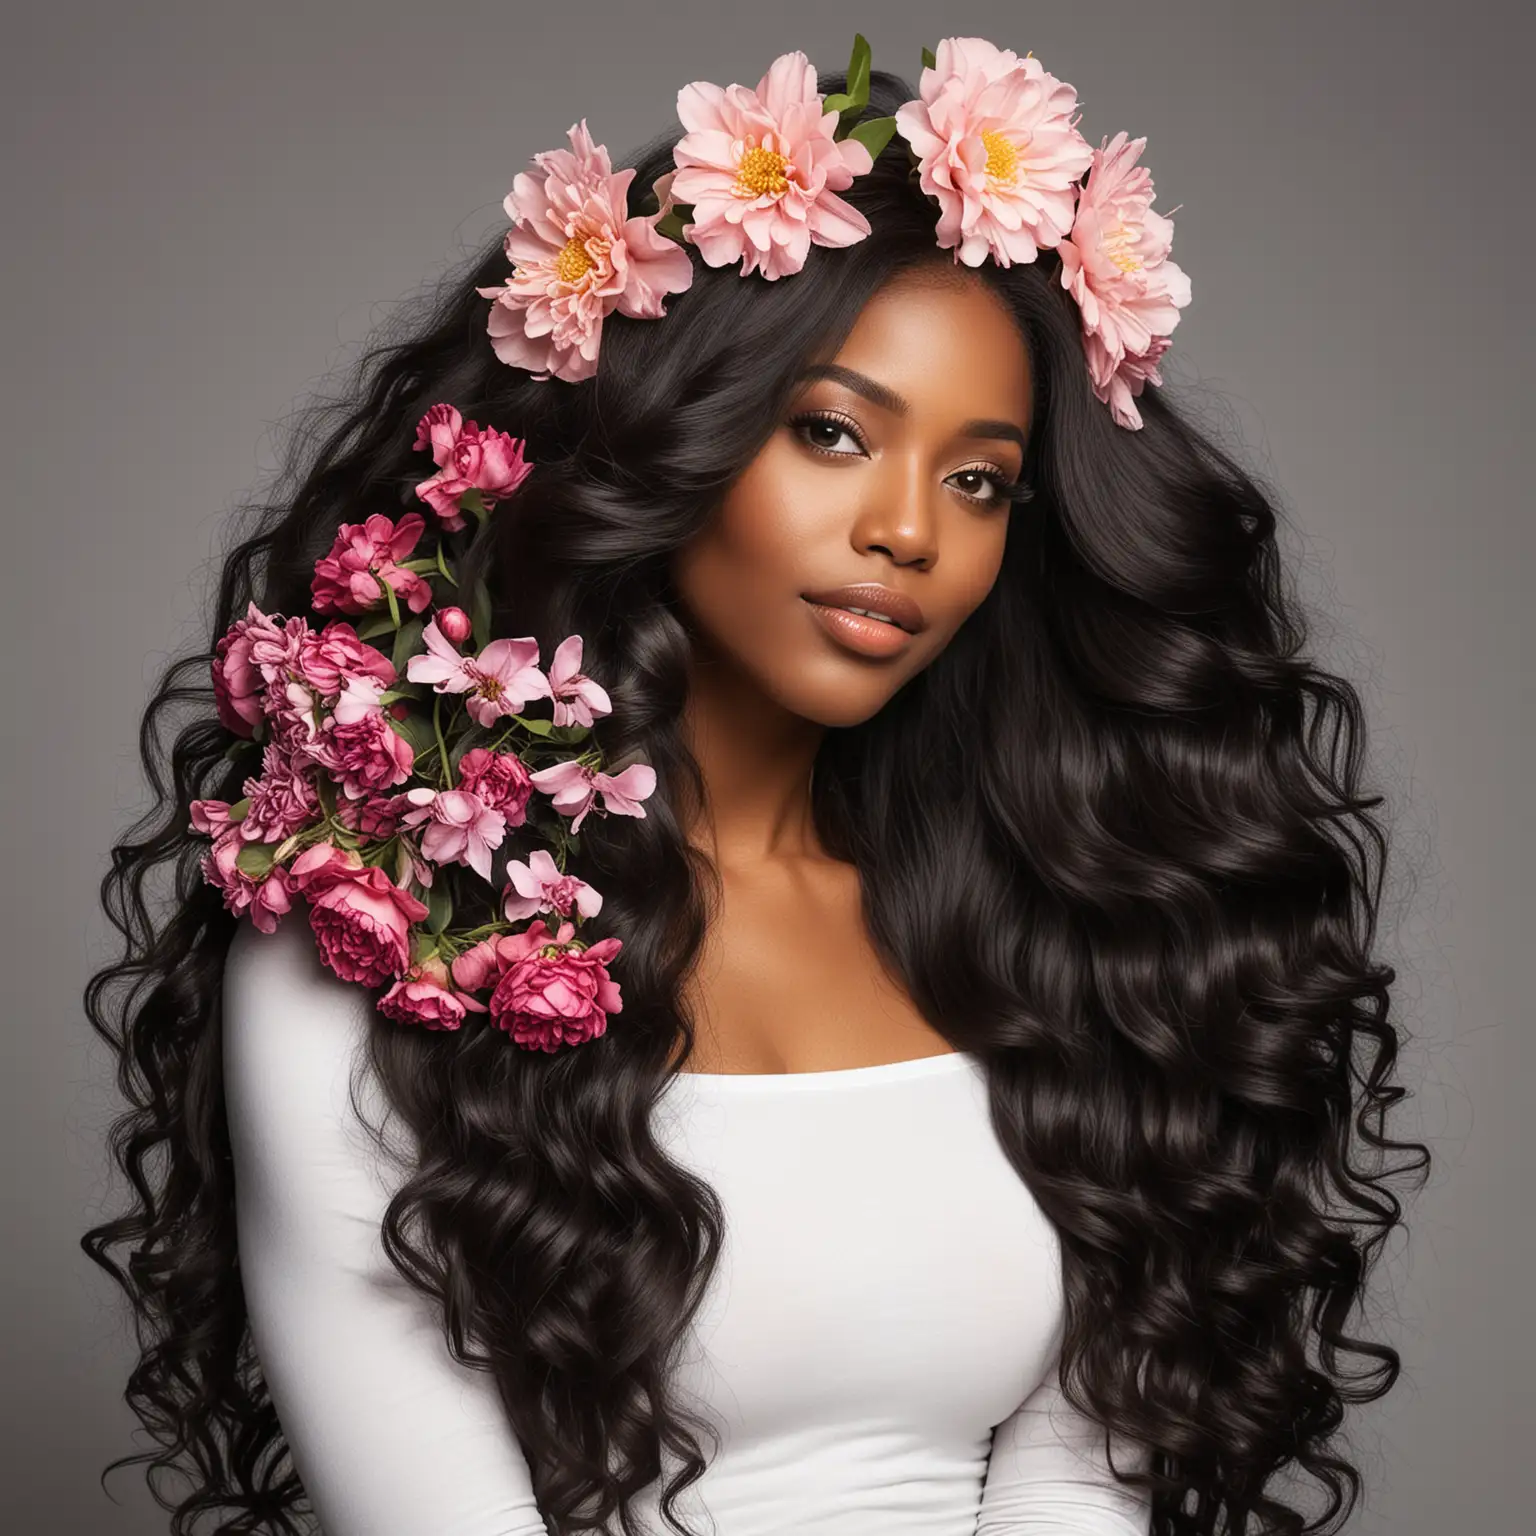 sexy black woman with gorgeous long hair and flower bundles